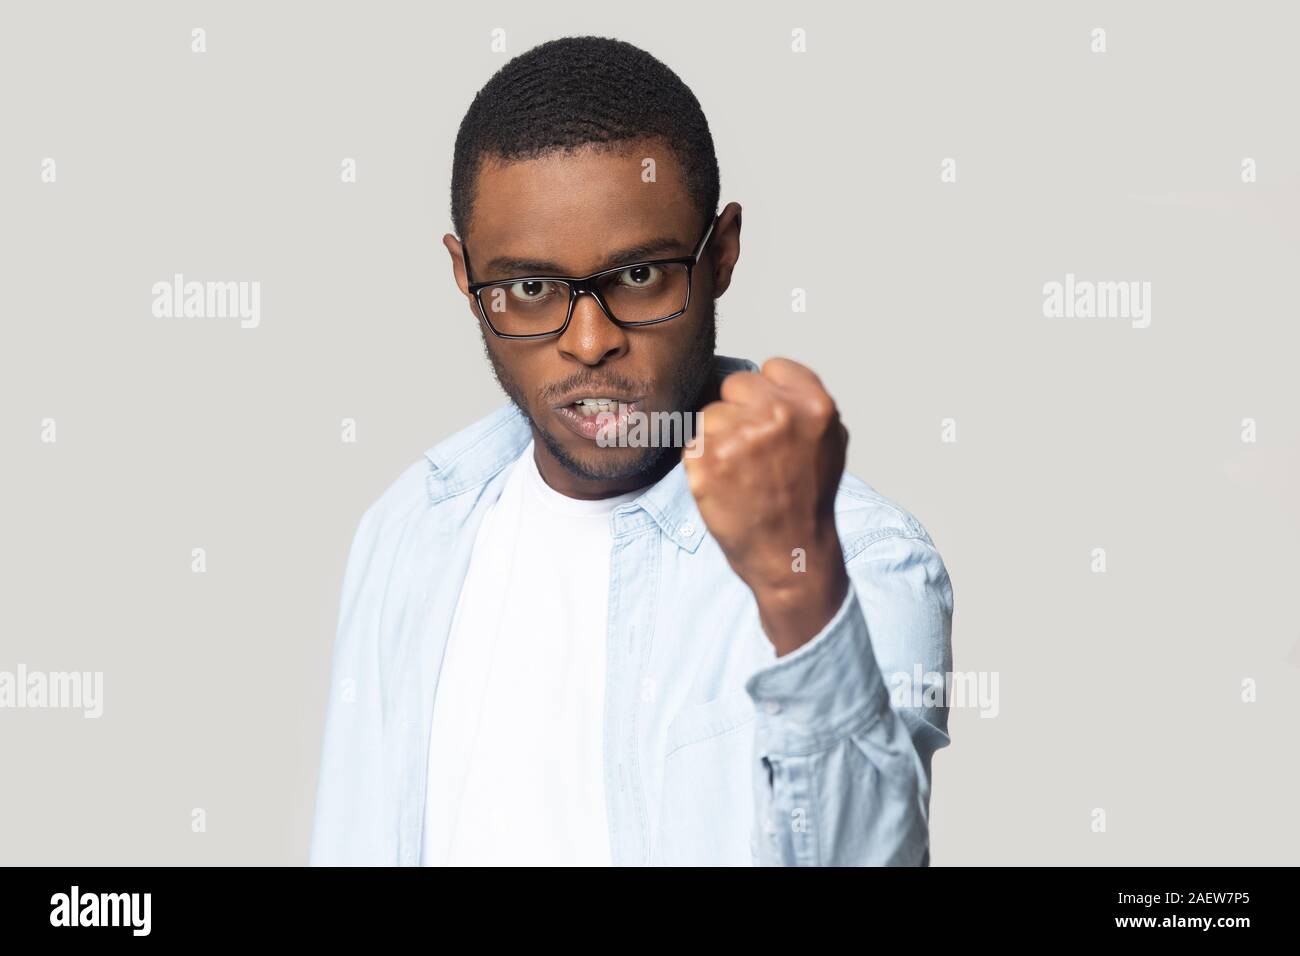 Angry annoyed african american millennial man showing clenched fist. Stock Photo